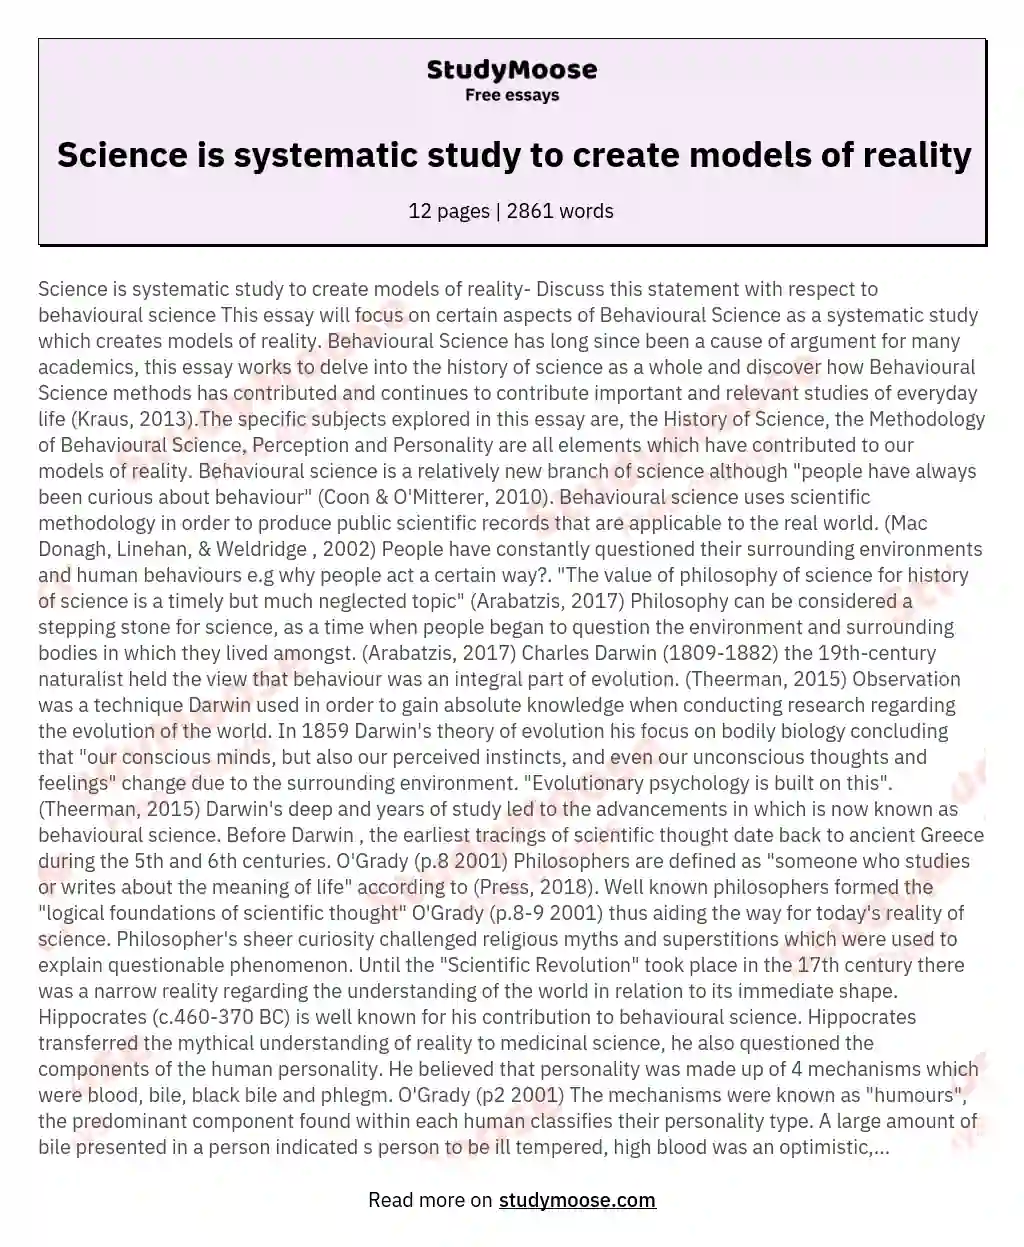 Science is systematic study to create models of reality